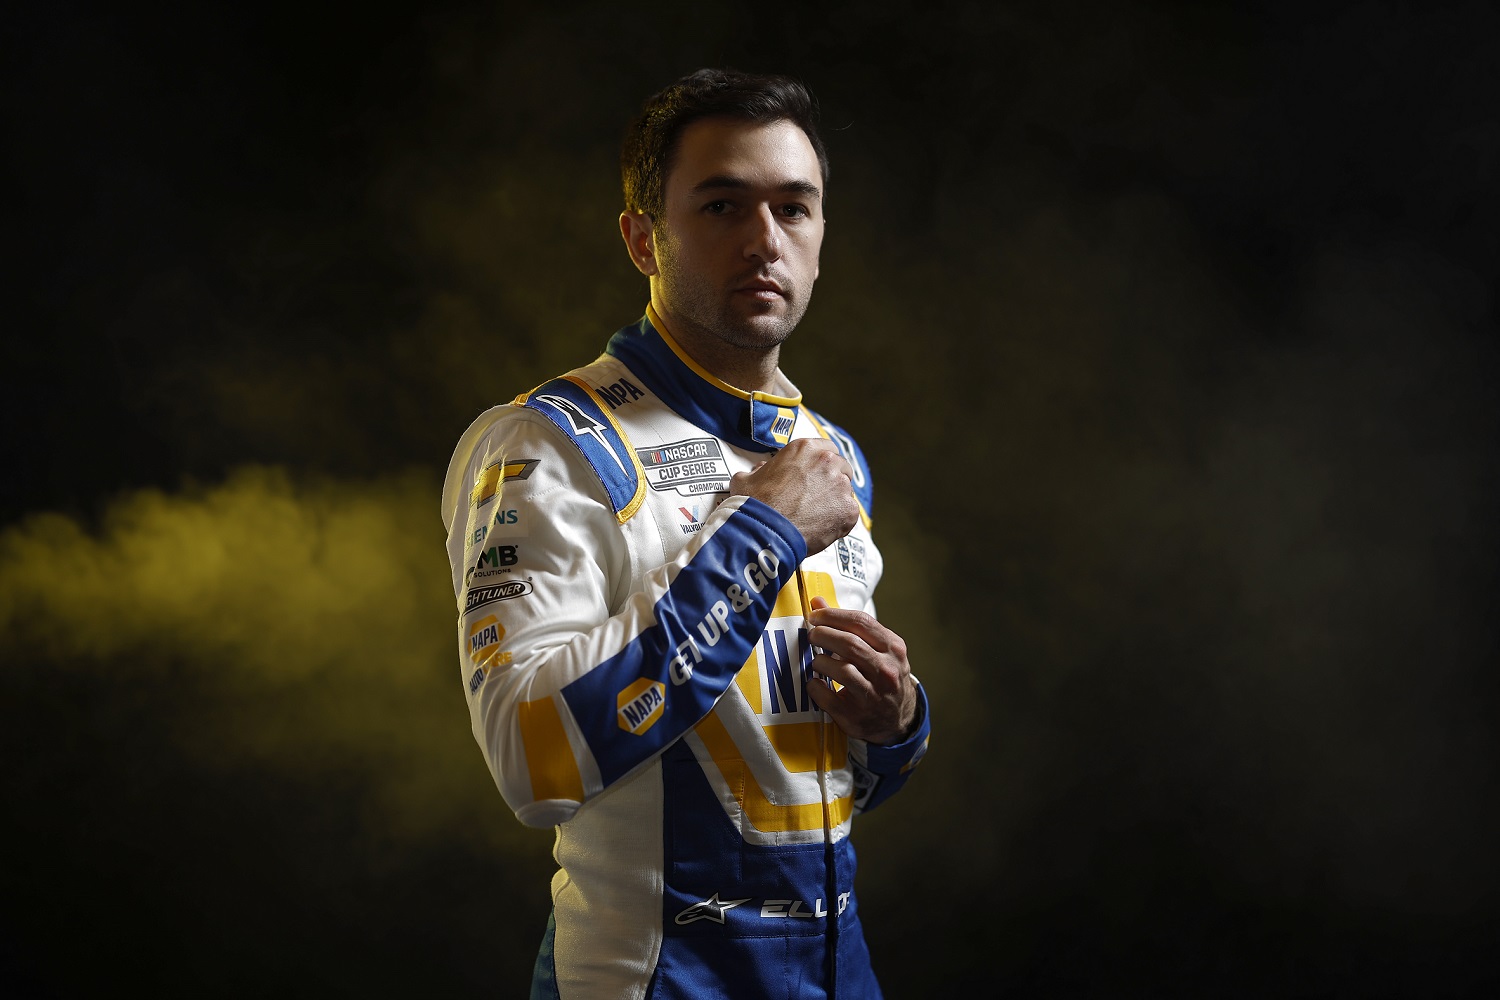 Chase Elliott poses for a photo during NASCAR Production Days at Charlotte Convention Center on Jan. 17, 2023. | Jared C. Tilton/Getty Images